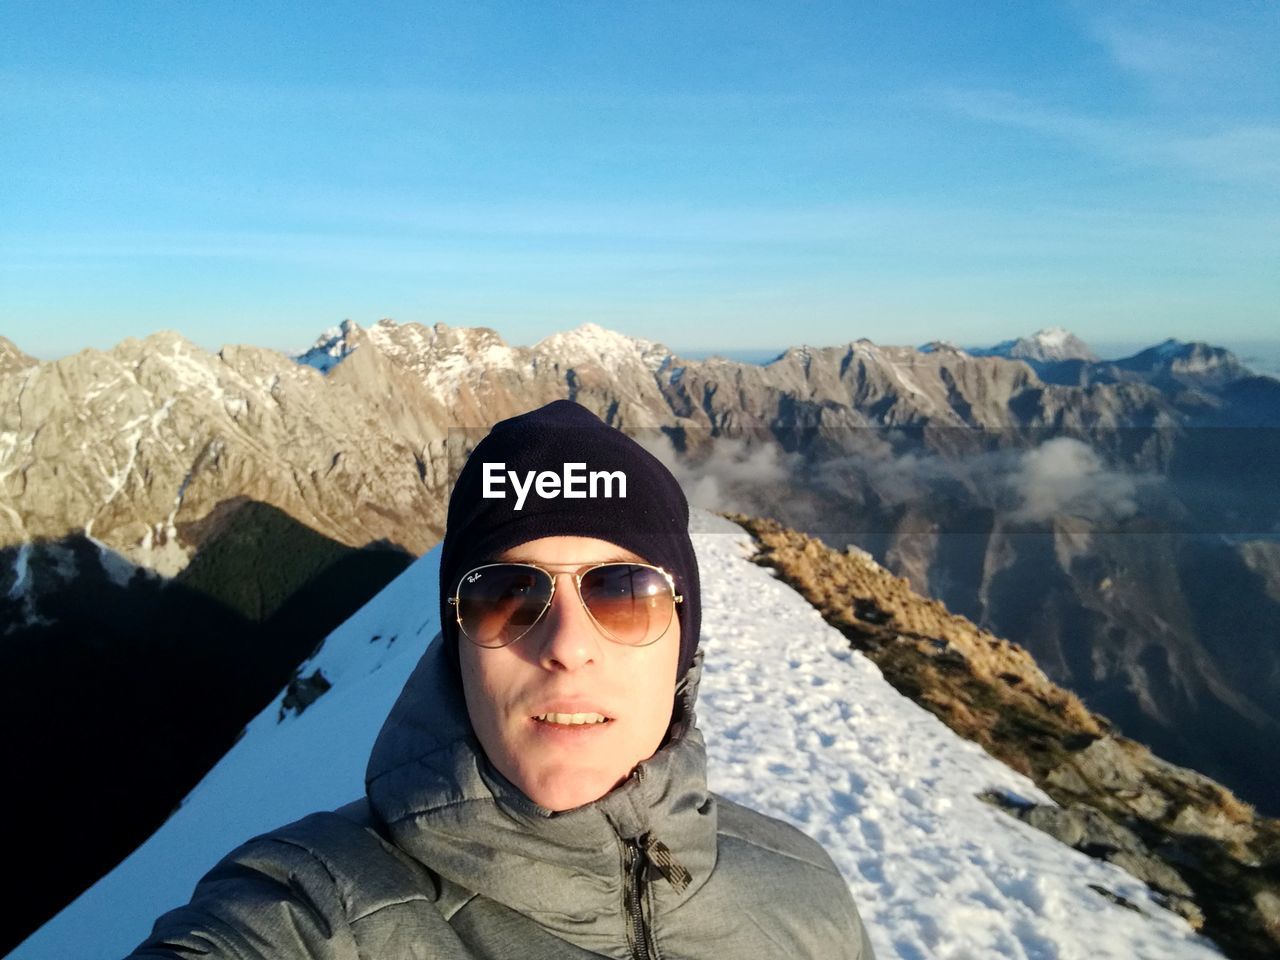 Portrait of young man wearing sunglasses standing against mountain range during winter